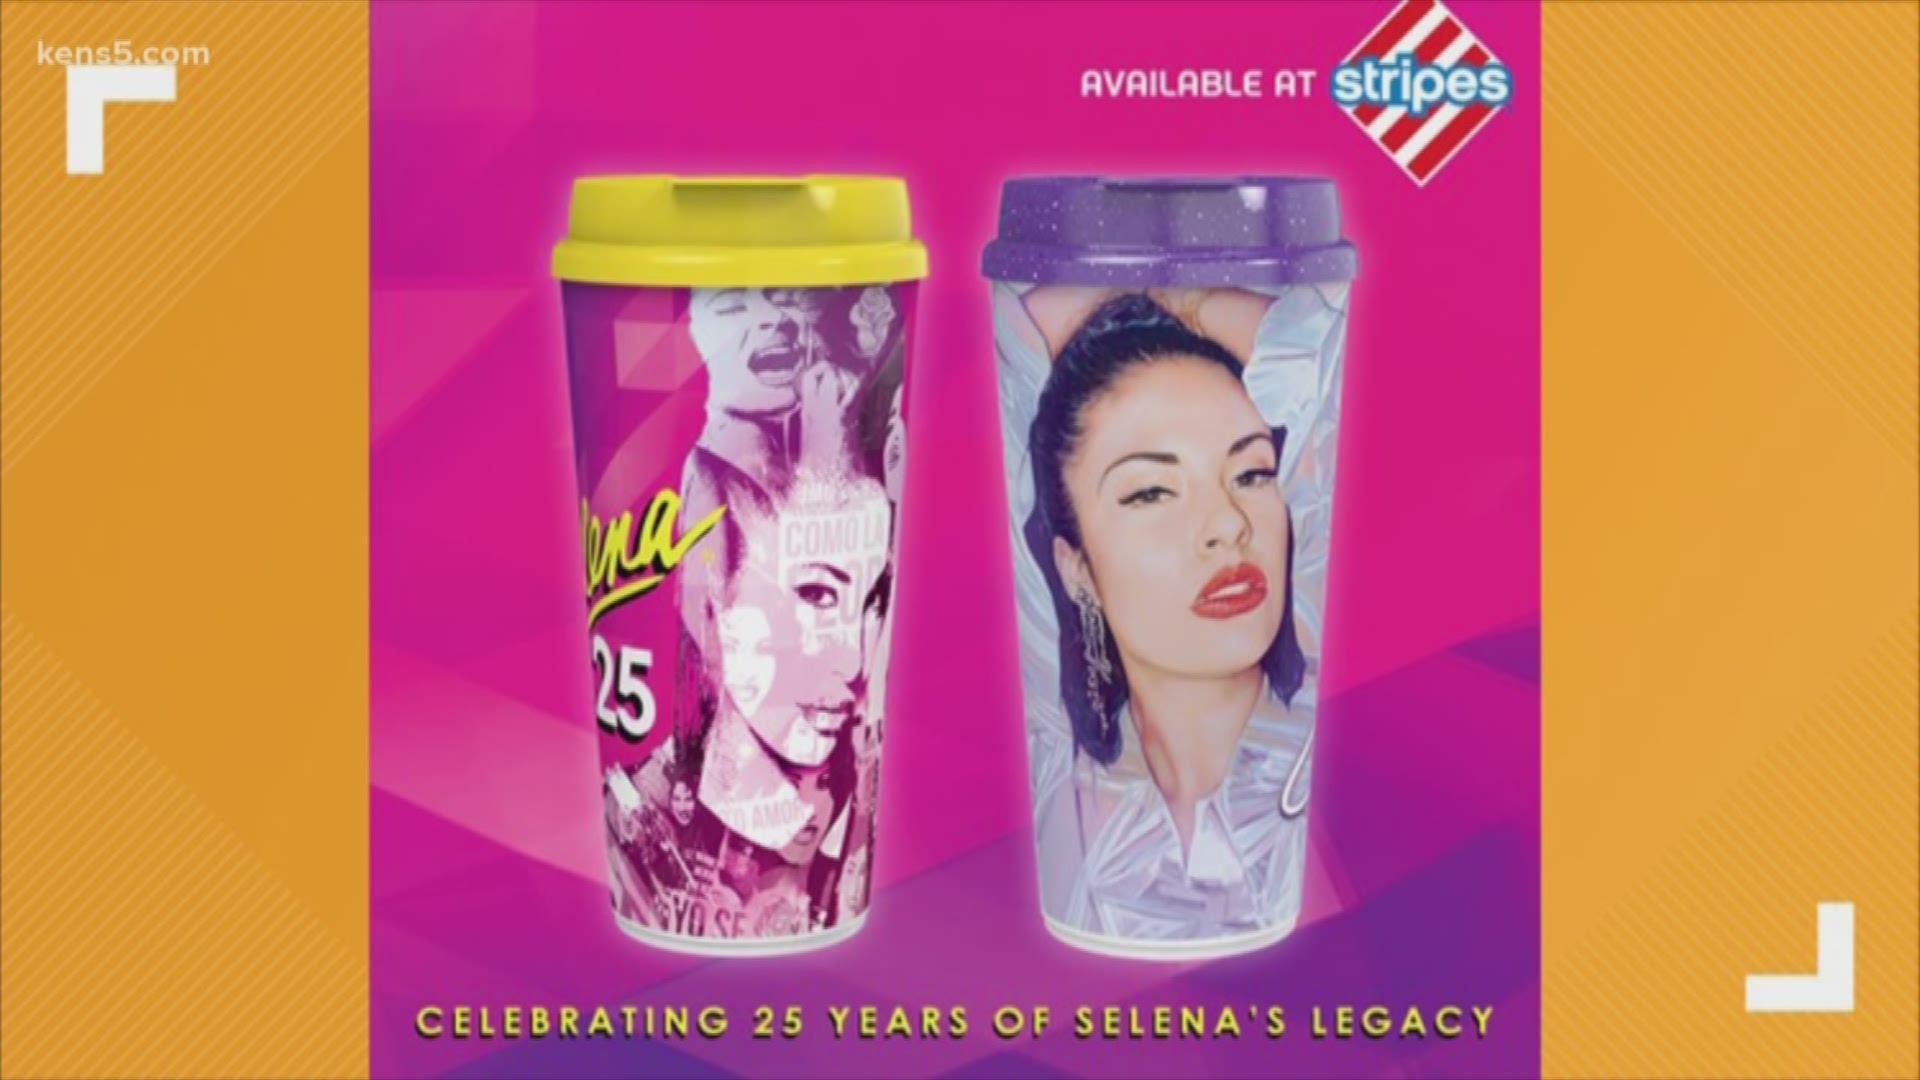 From speciality Stripes cups to a tribute concert to fiesta medals, here are three trending Selena stories rolled into one. Digital journalist Lexi Hazlett has more.